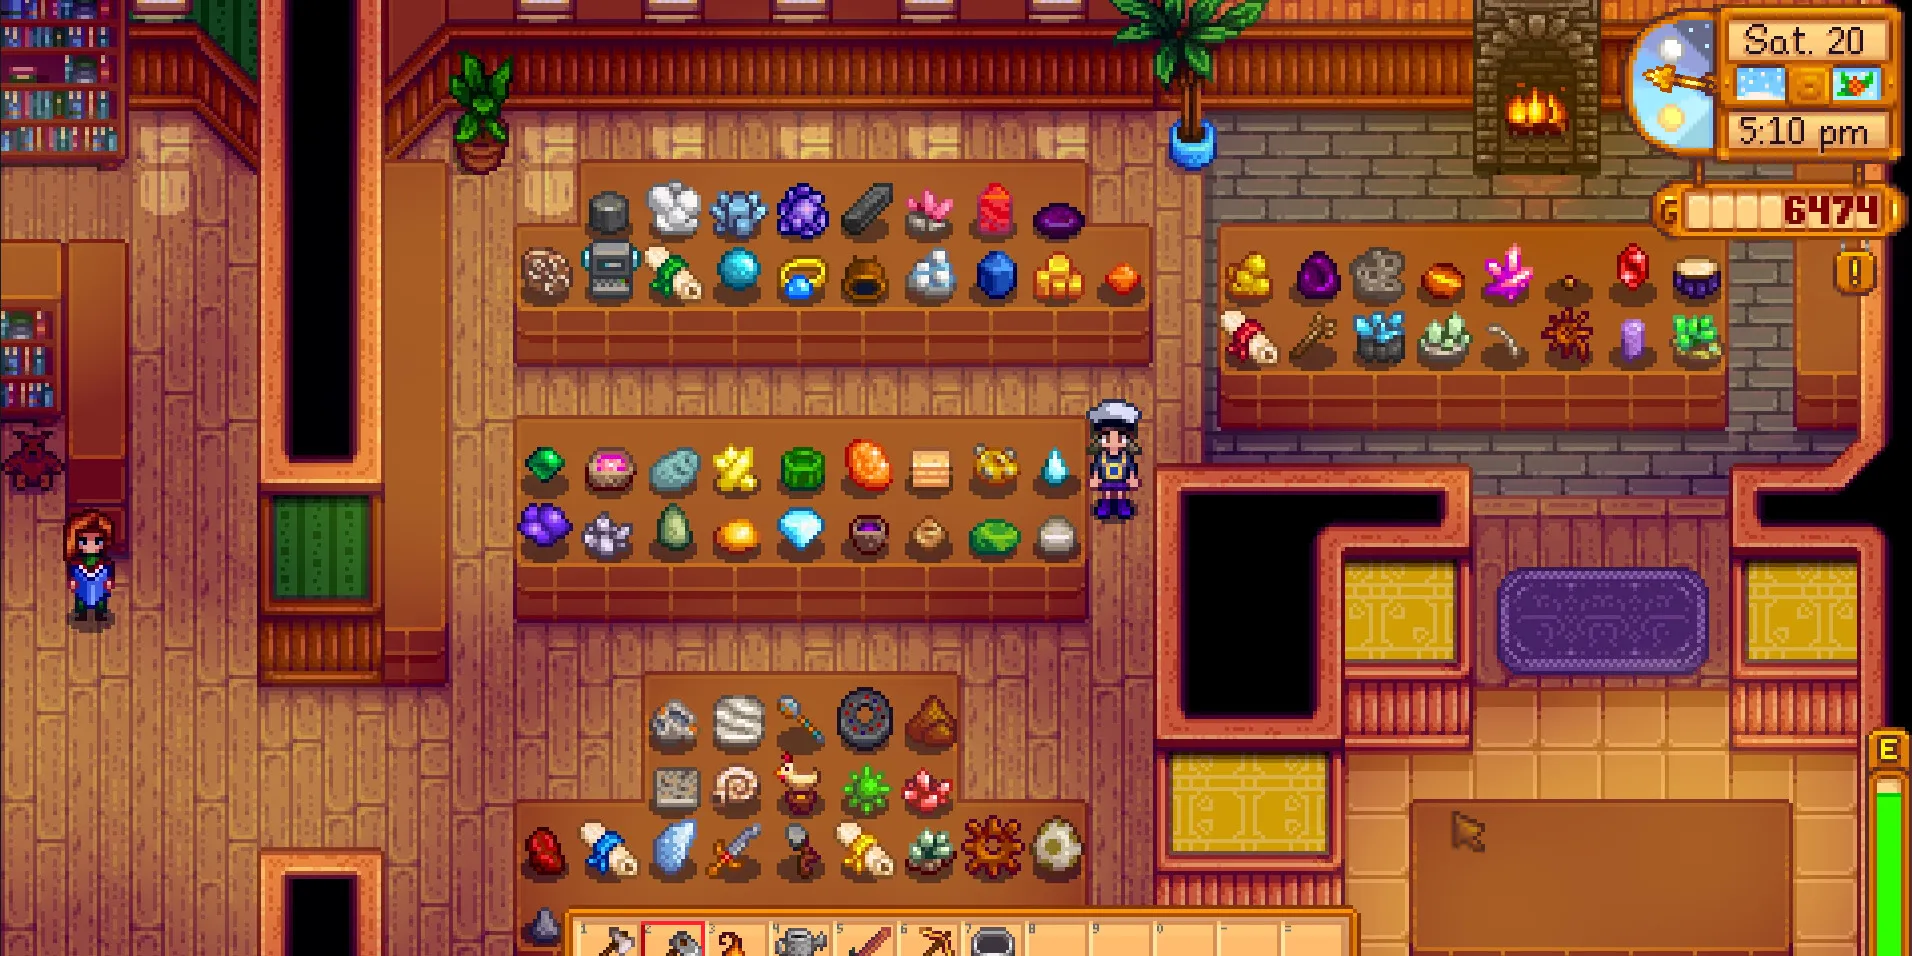 Image of the museum collection of gems and artifacts in Stardew Valley